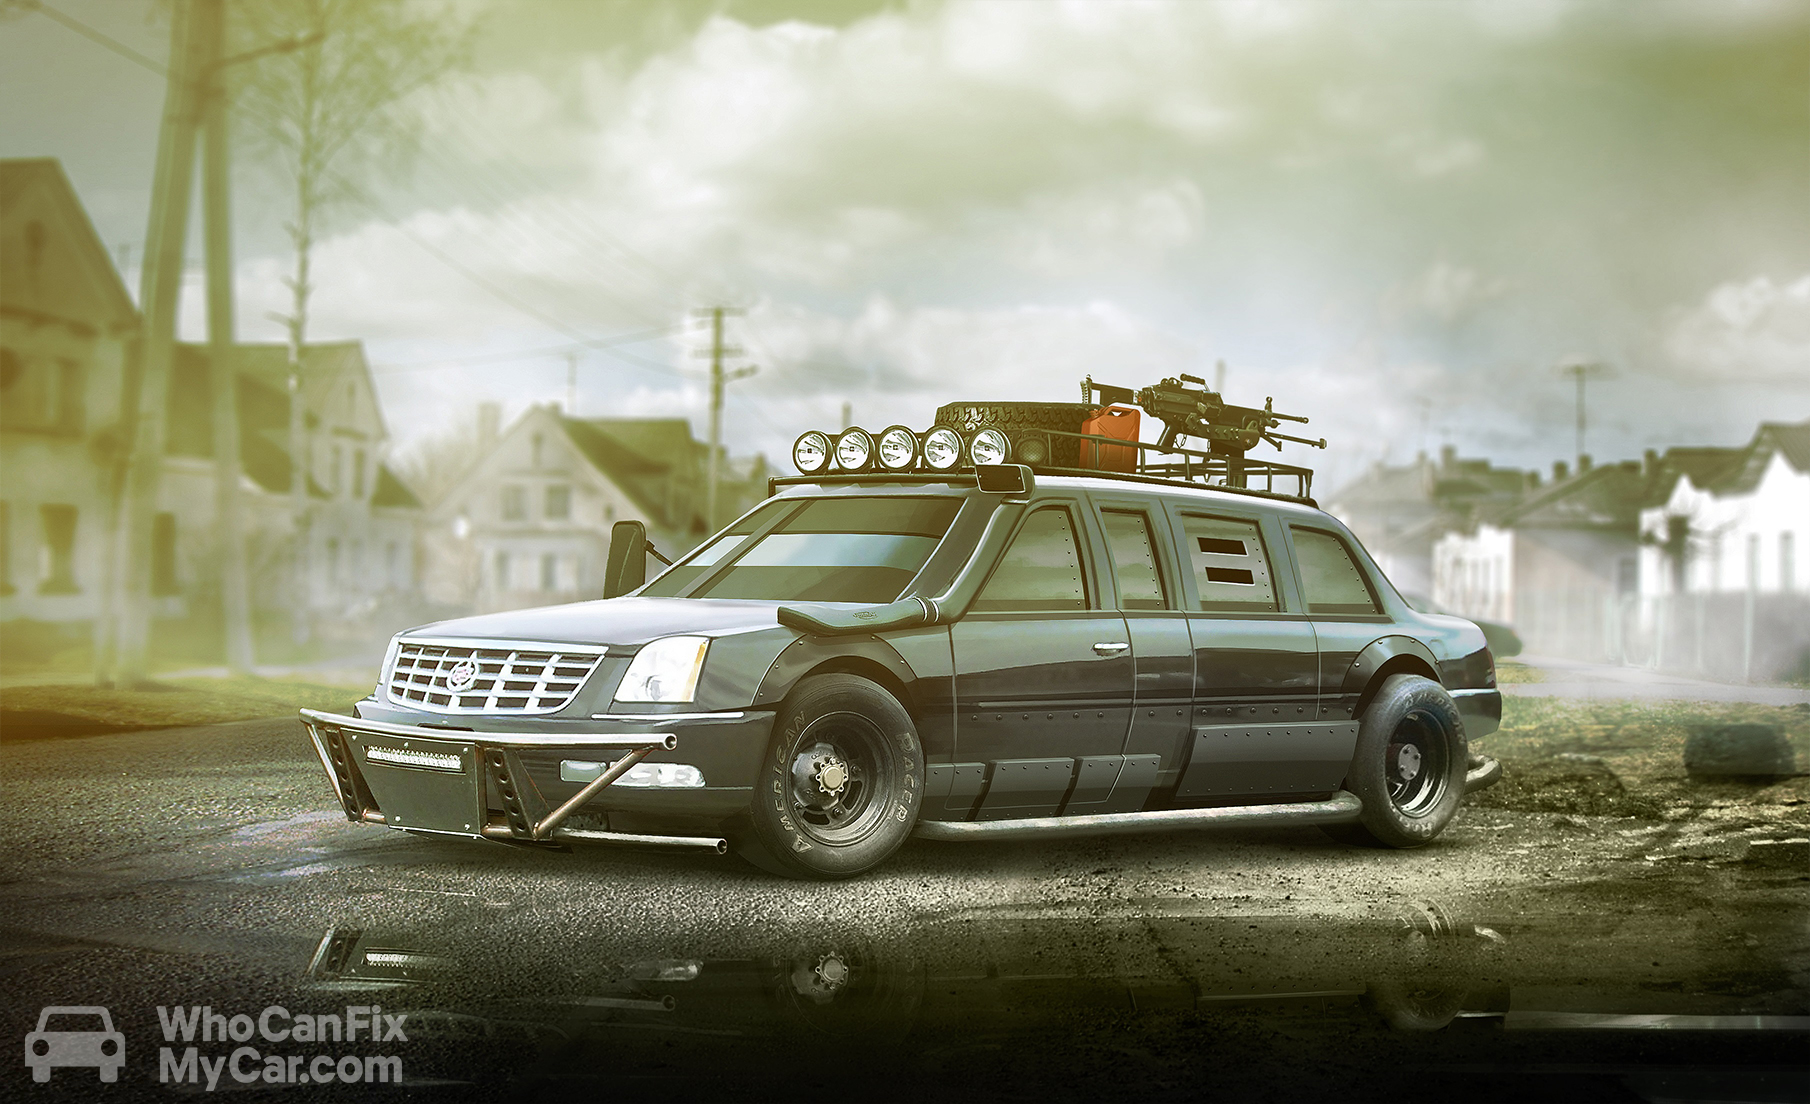 Here are seven doomsday cars to get you through the impending apocalypse - Cadillac One